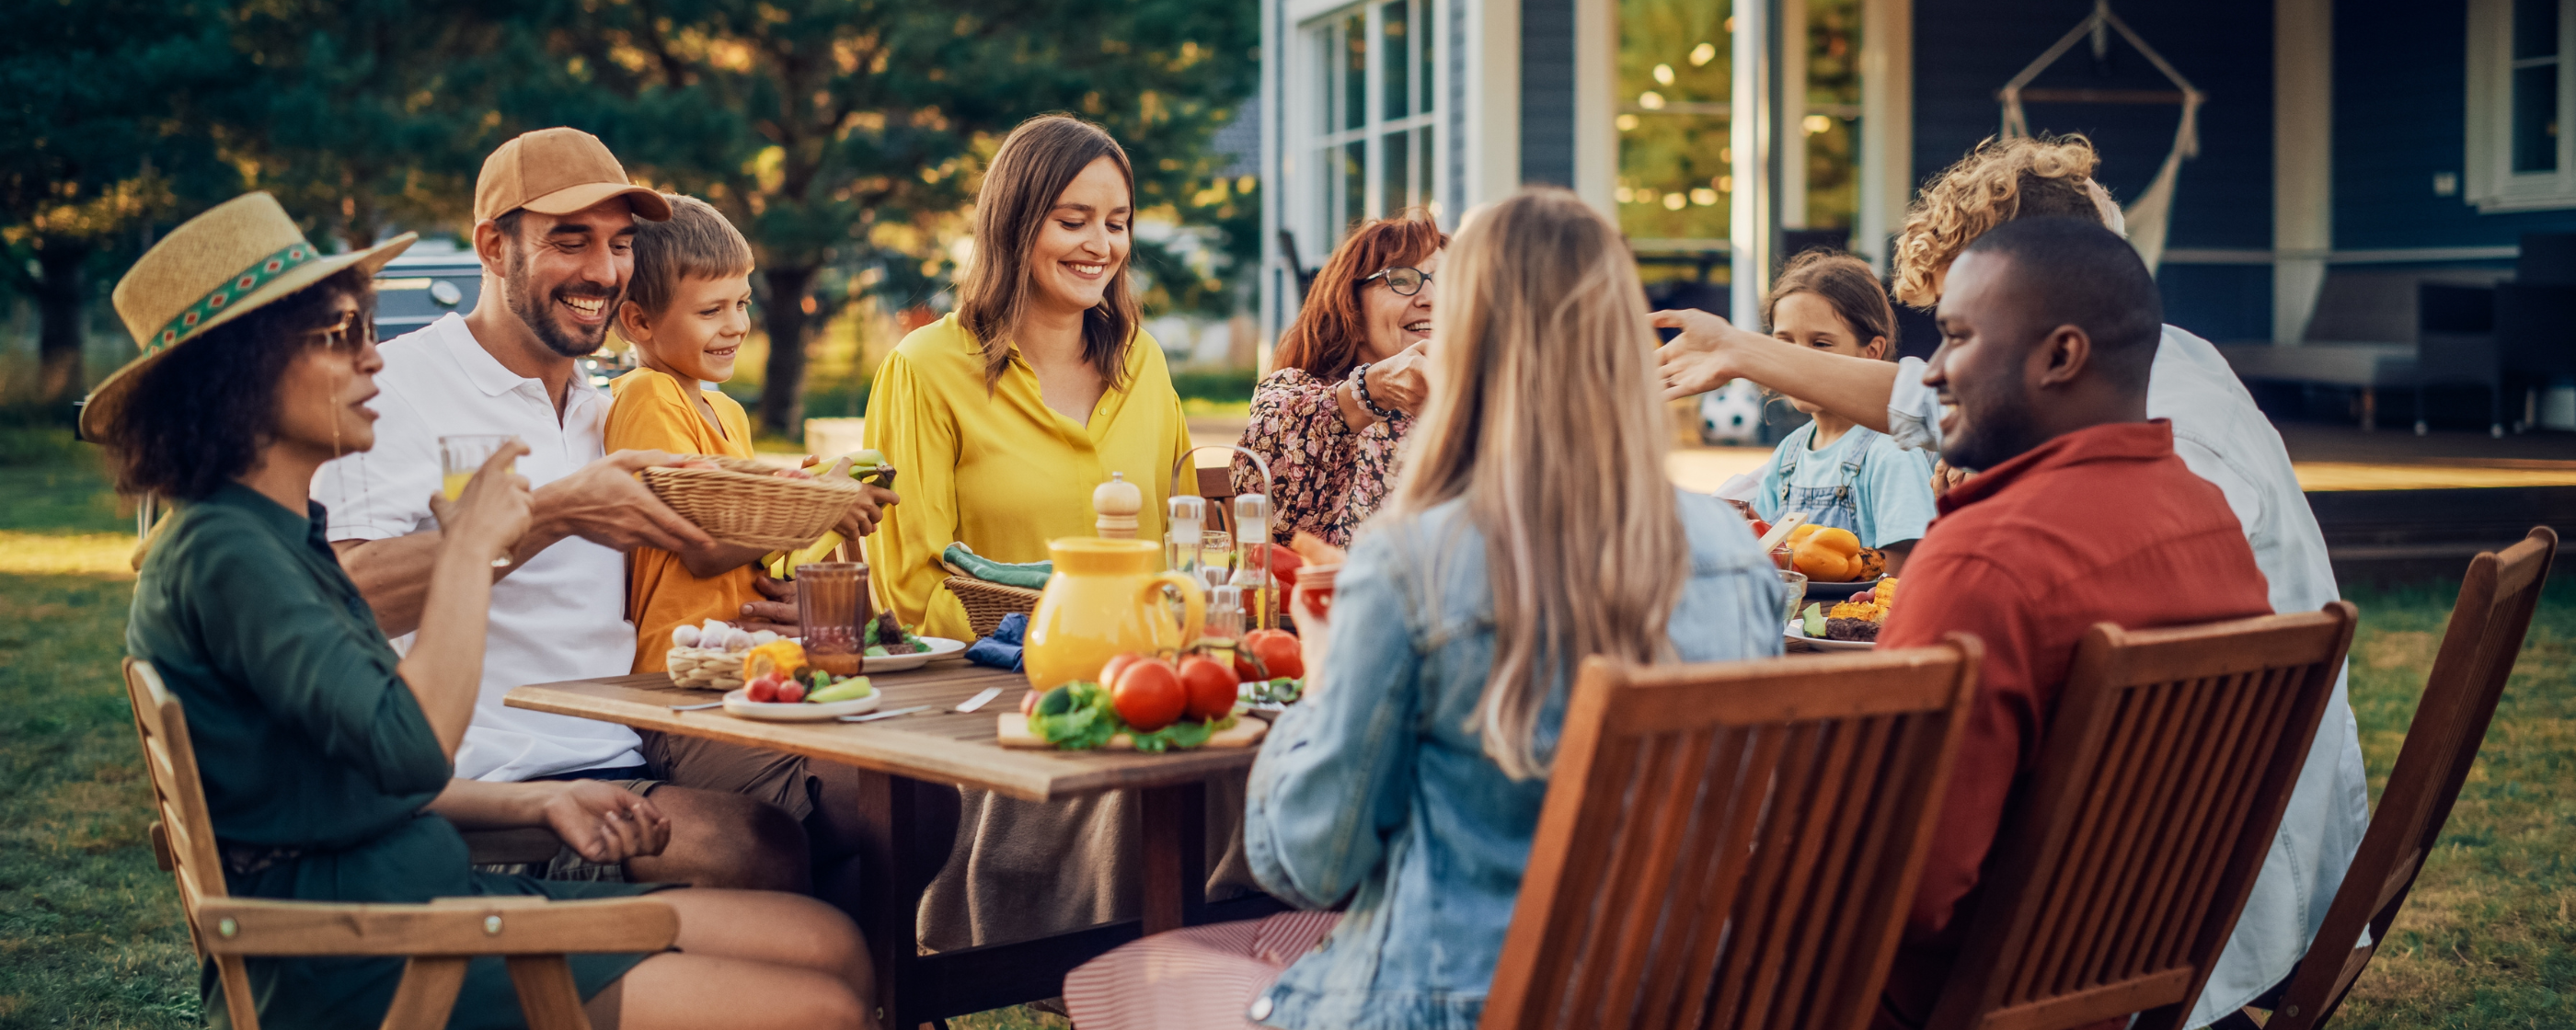 Group of smiling people dining at an outdoor table.